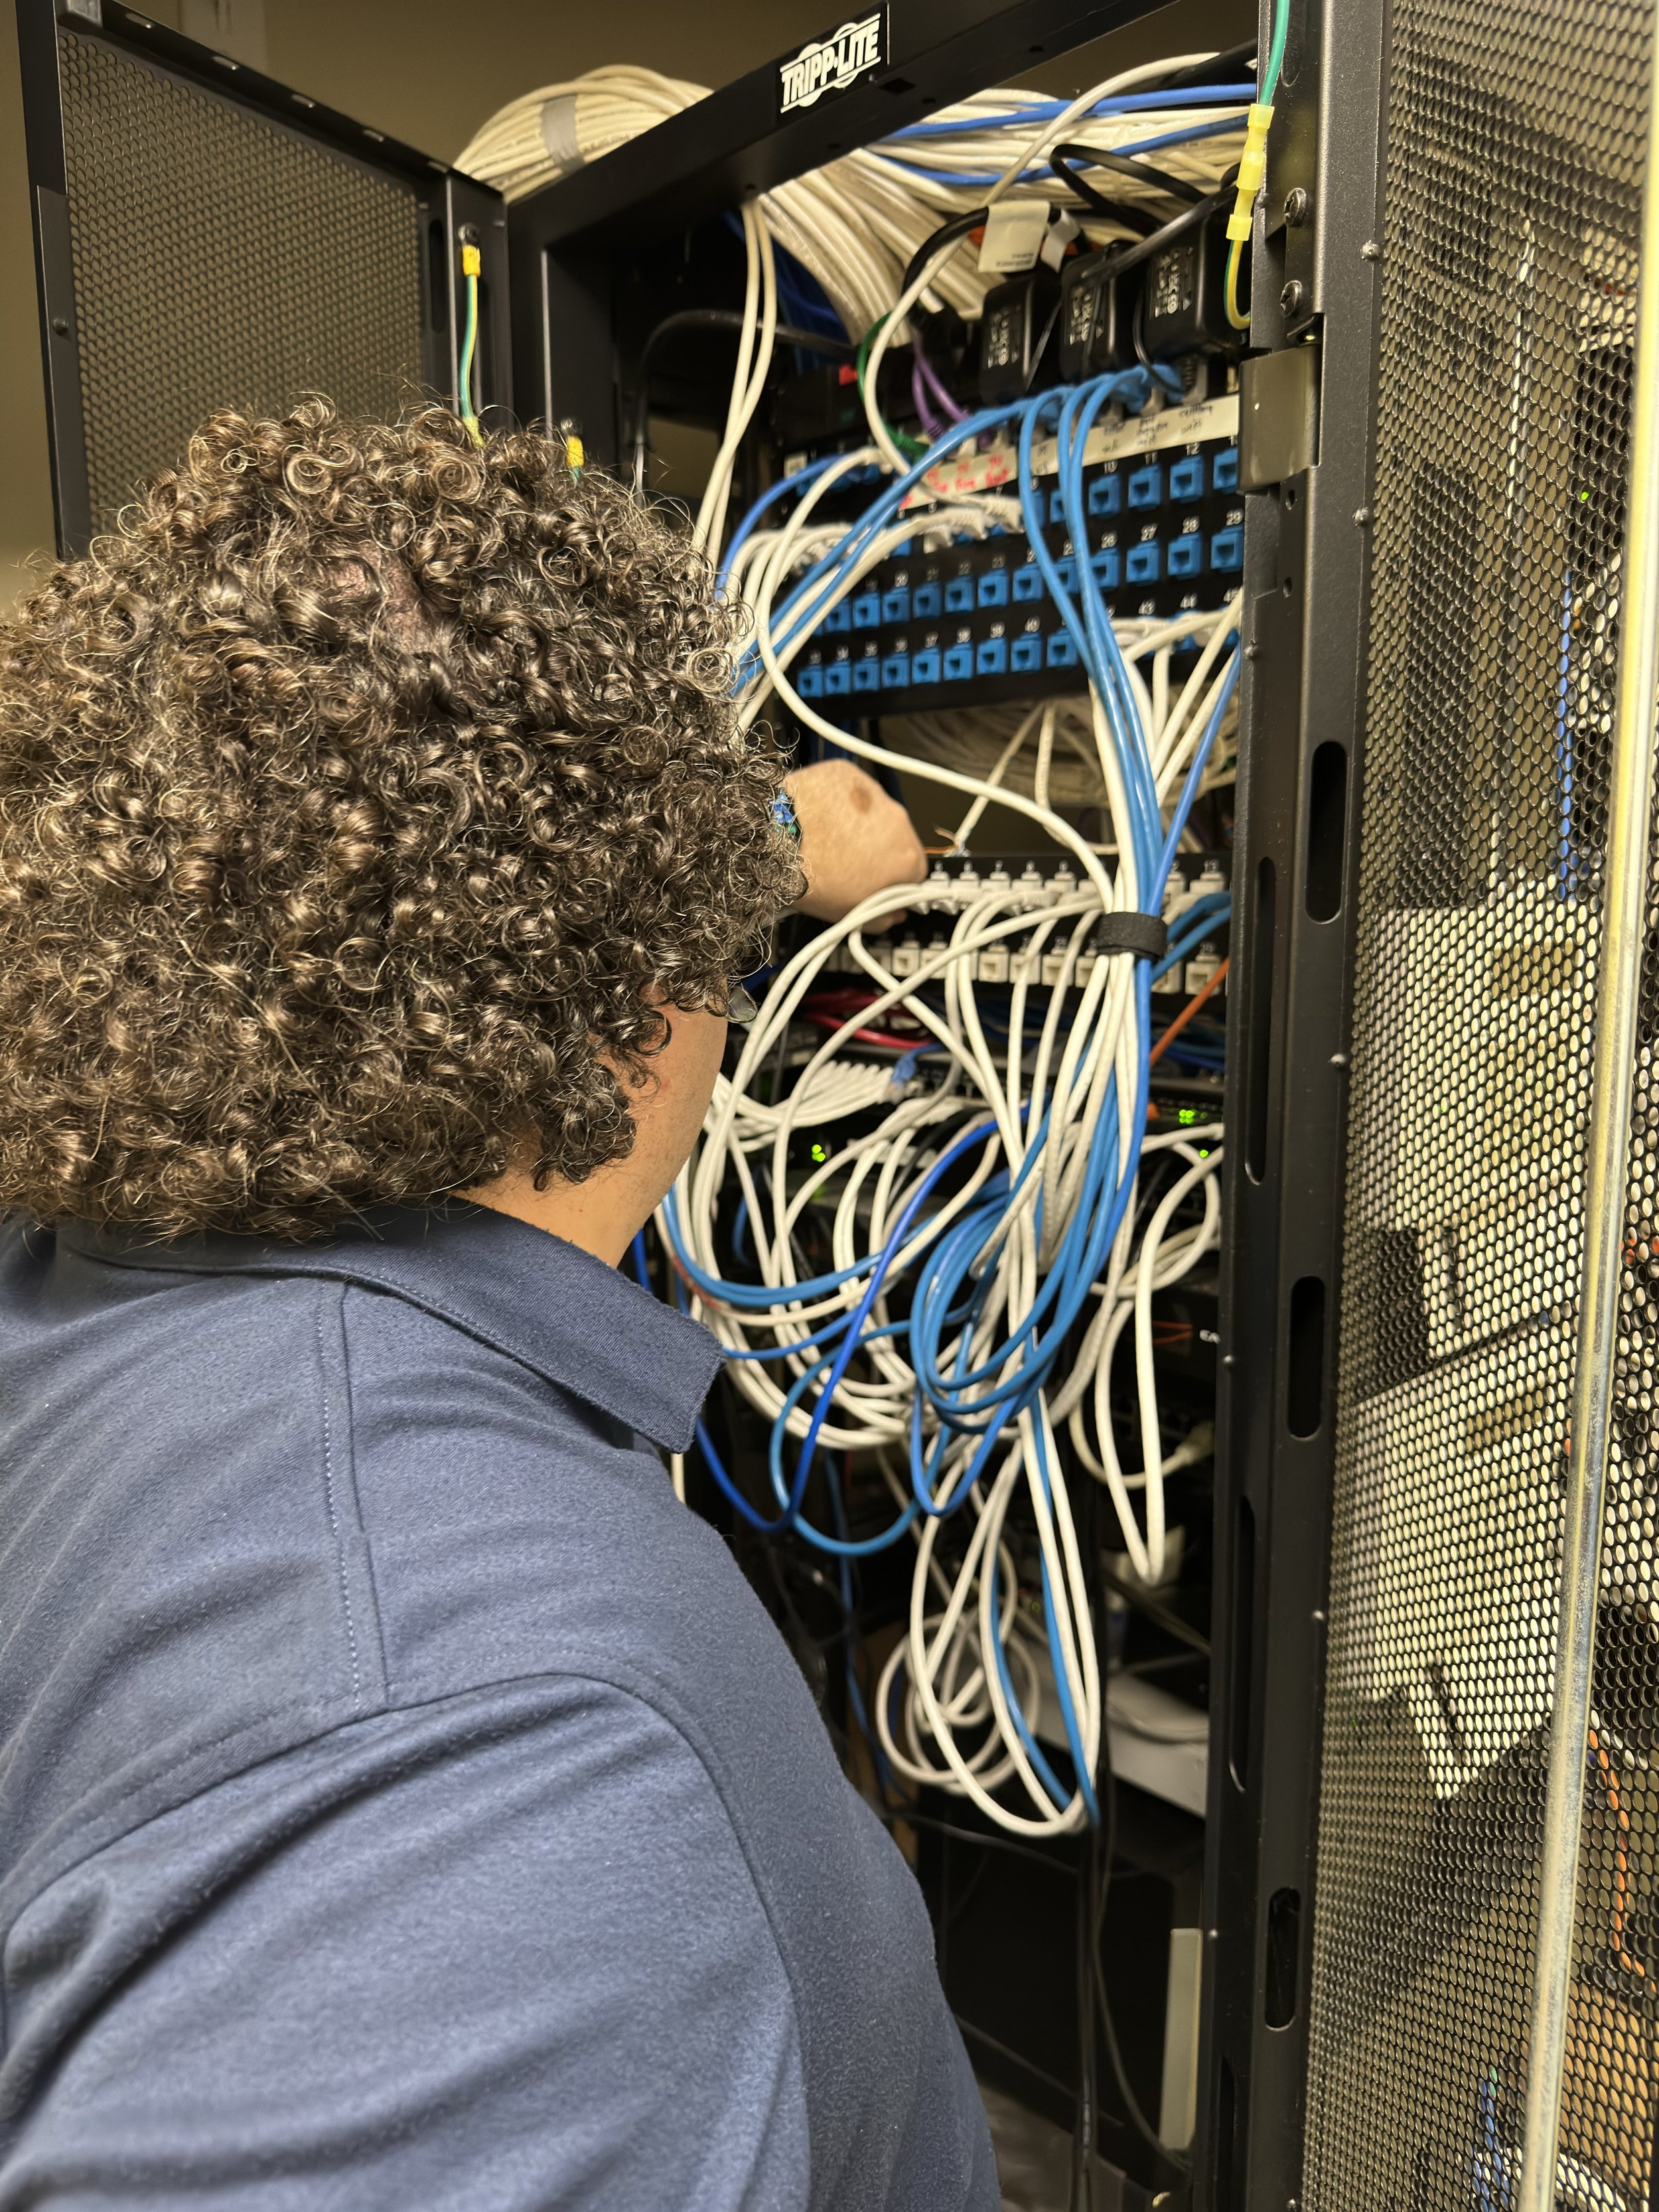  Tony works on a complex set of ethernet switches in a server closet. 